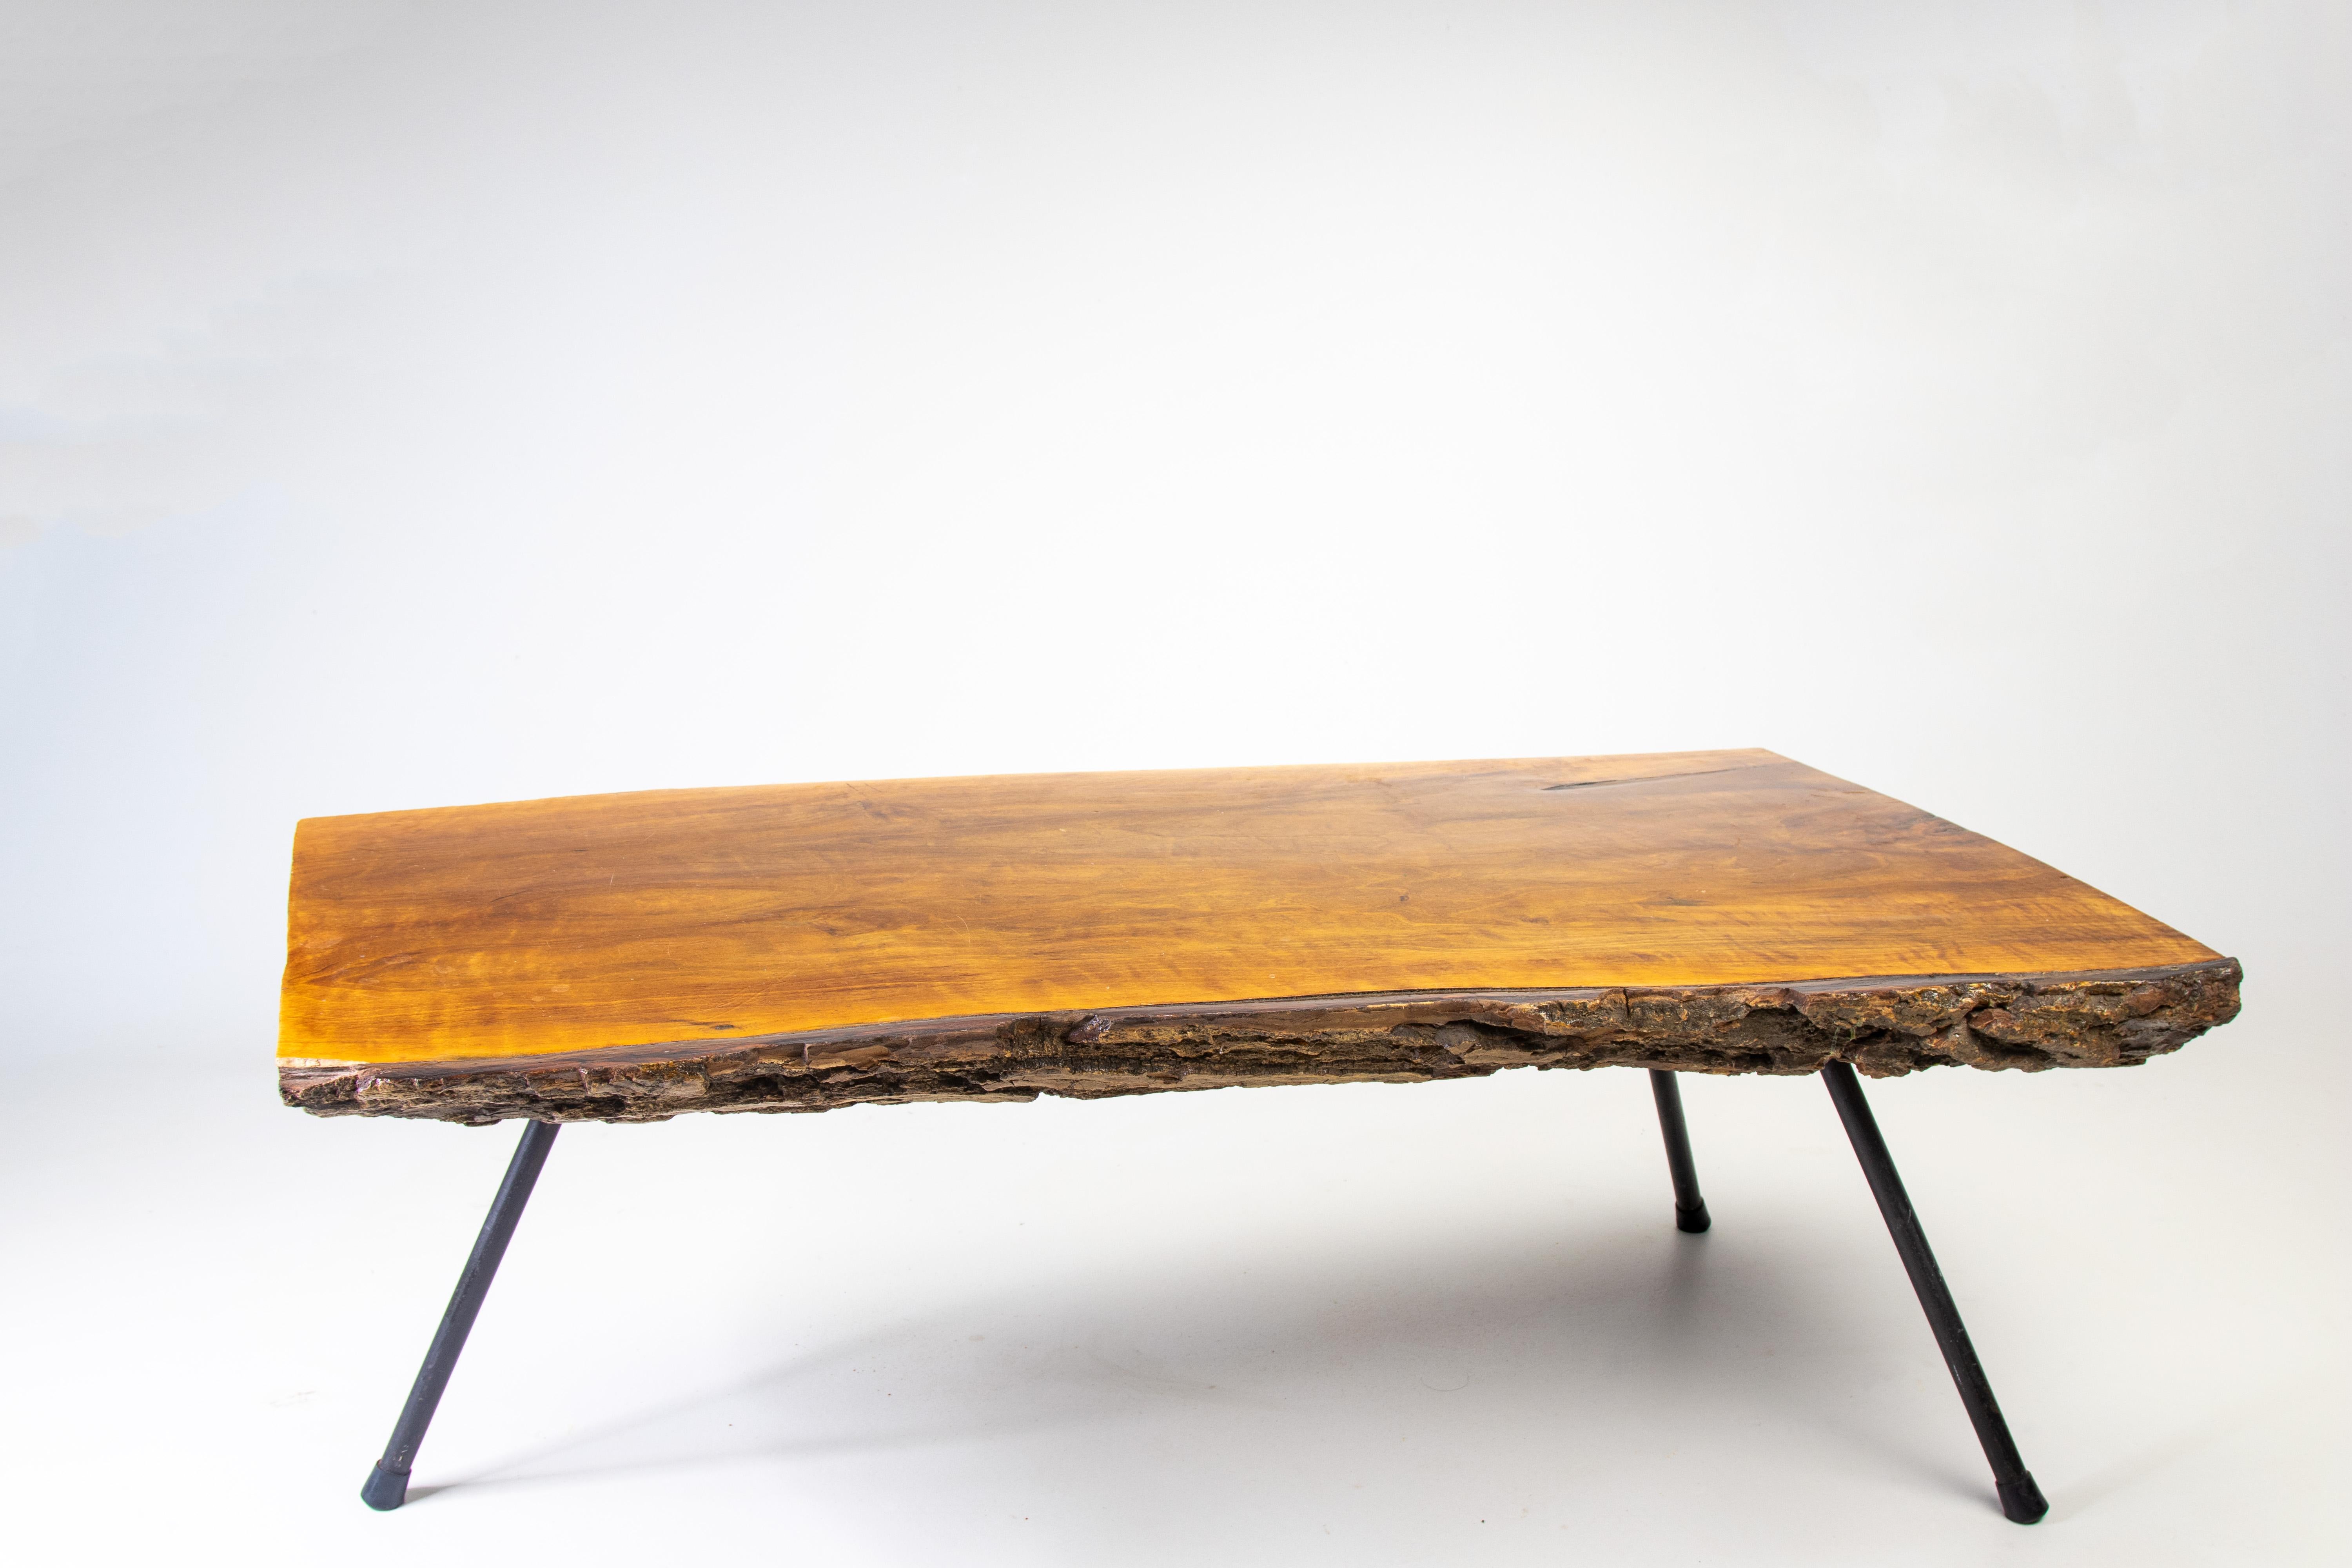 An organic modern coffee table in the manner of Carl Aubock.  A 1960s table featuring a pine slab with exposed bark, floating over a trio of iron legs with a great splay.  Heavy and vintage. San Diego California Provenance. 

Condition:

Unlevel